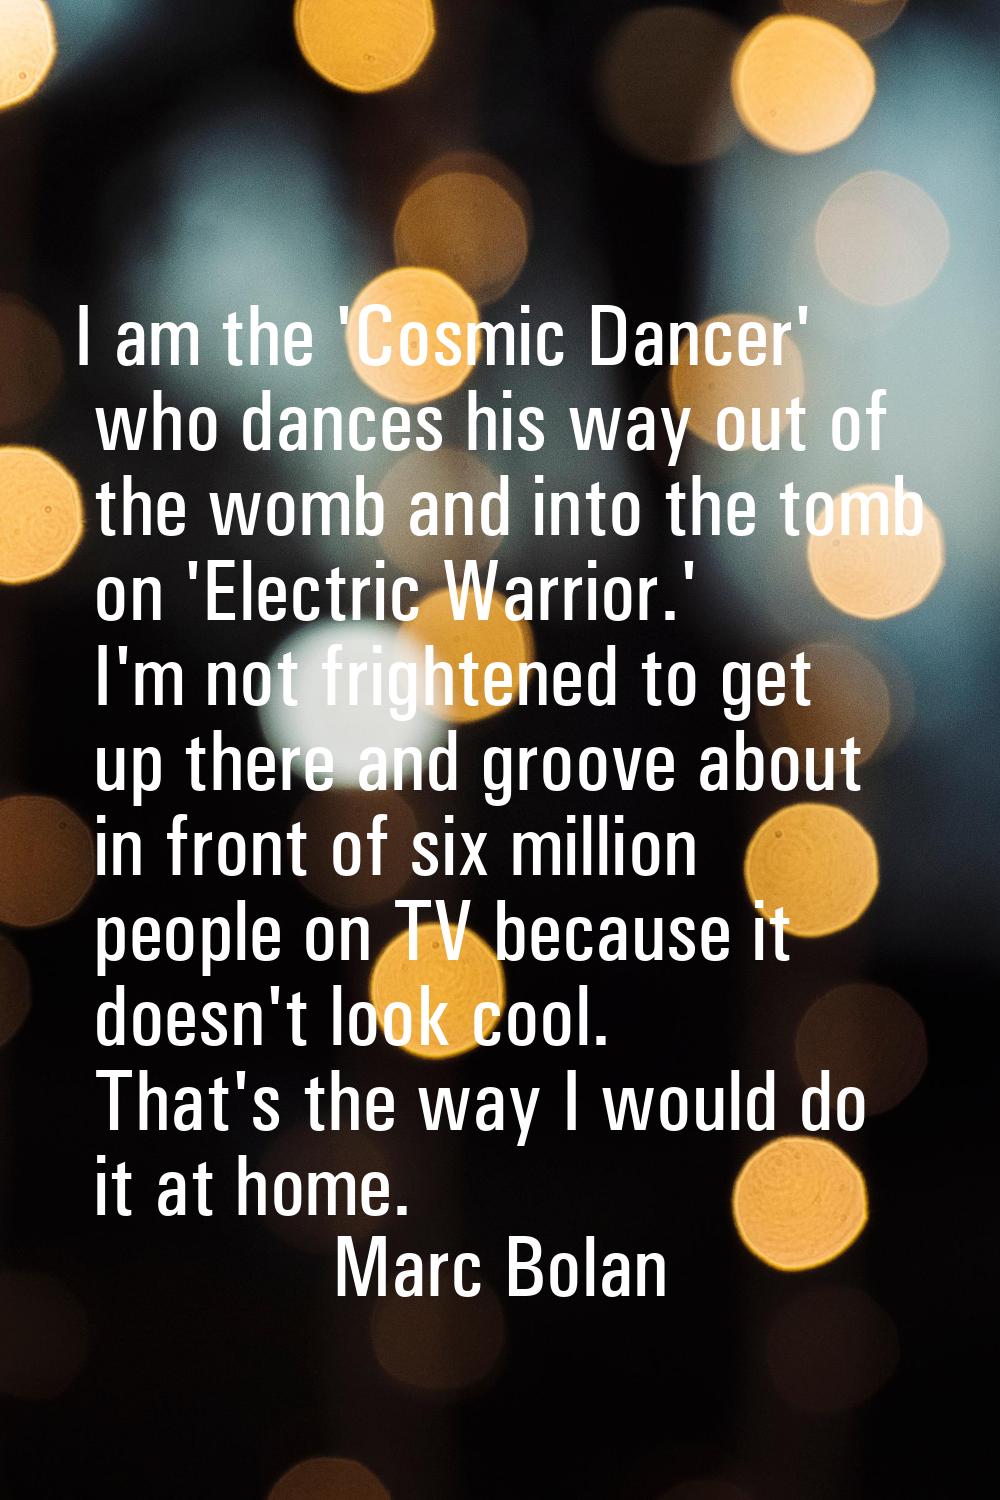 I am the 'Cosmic Dancer' who dances his way out of the womb and into the tomb on 'Electric Warrior.